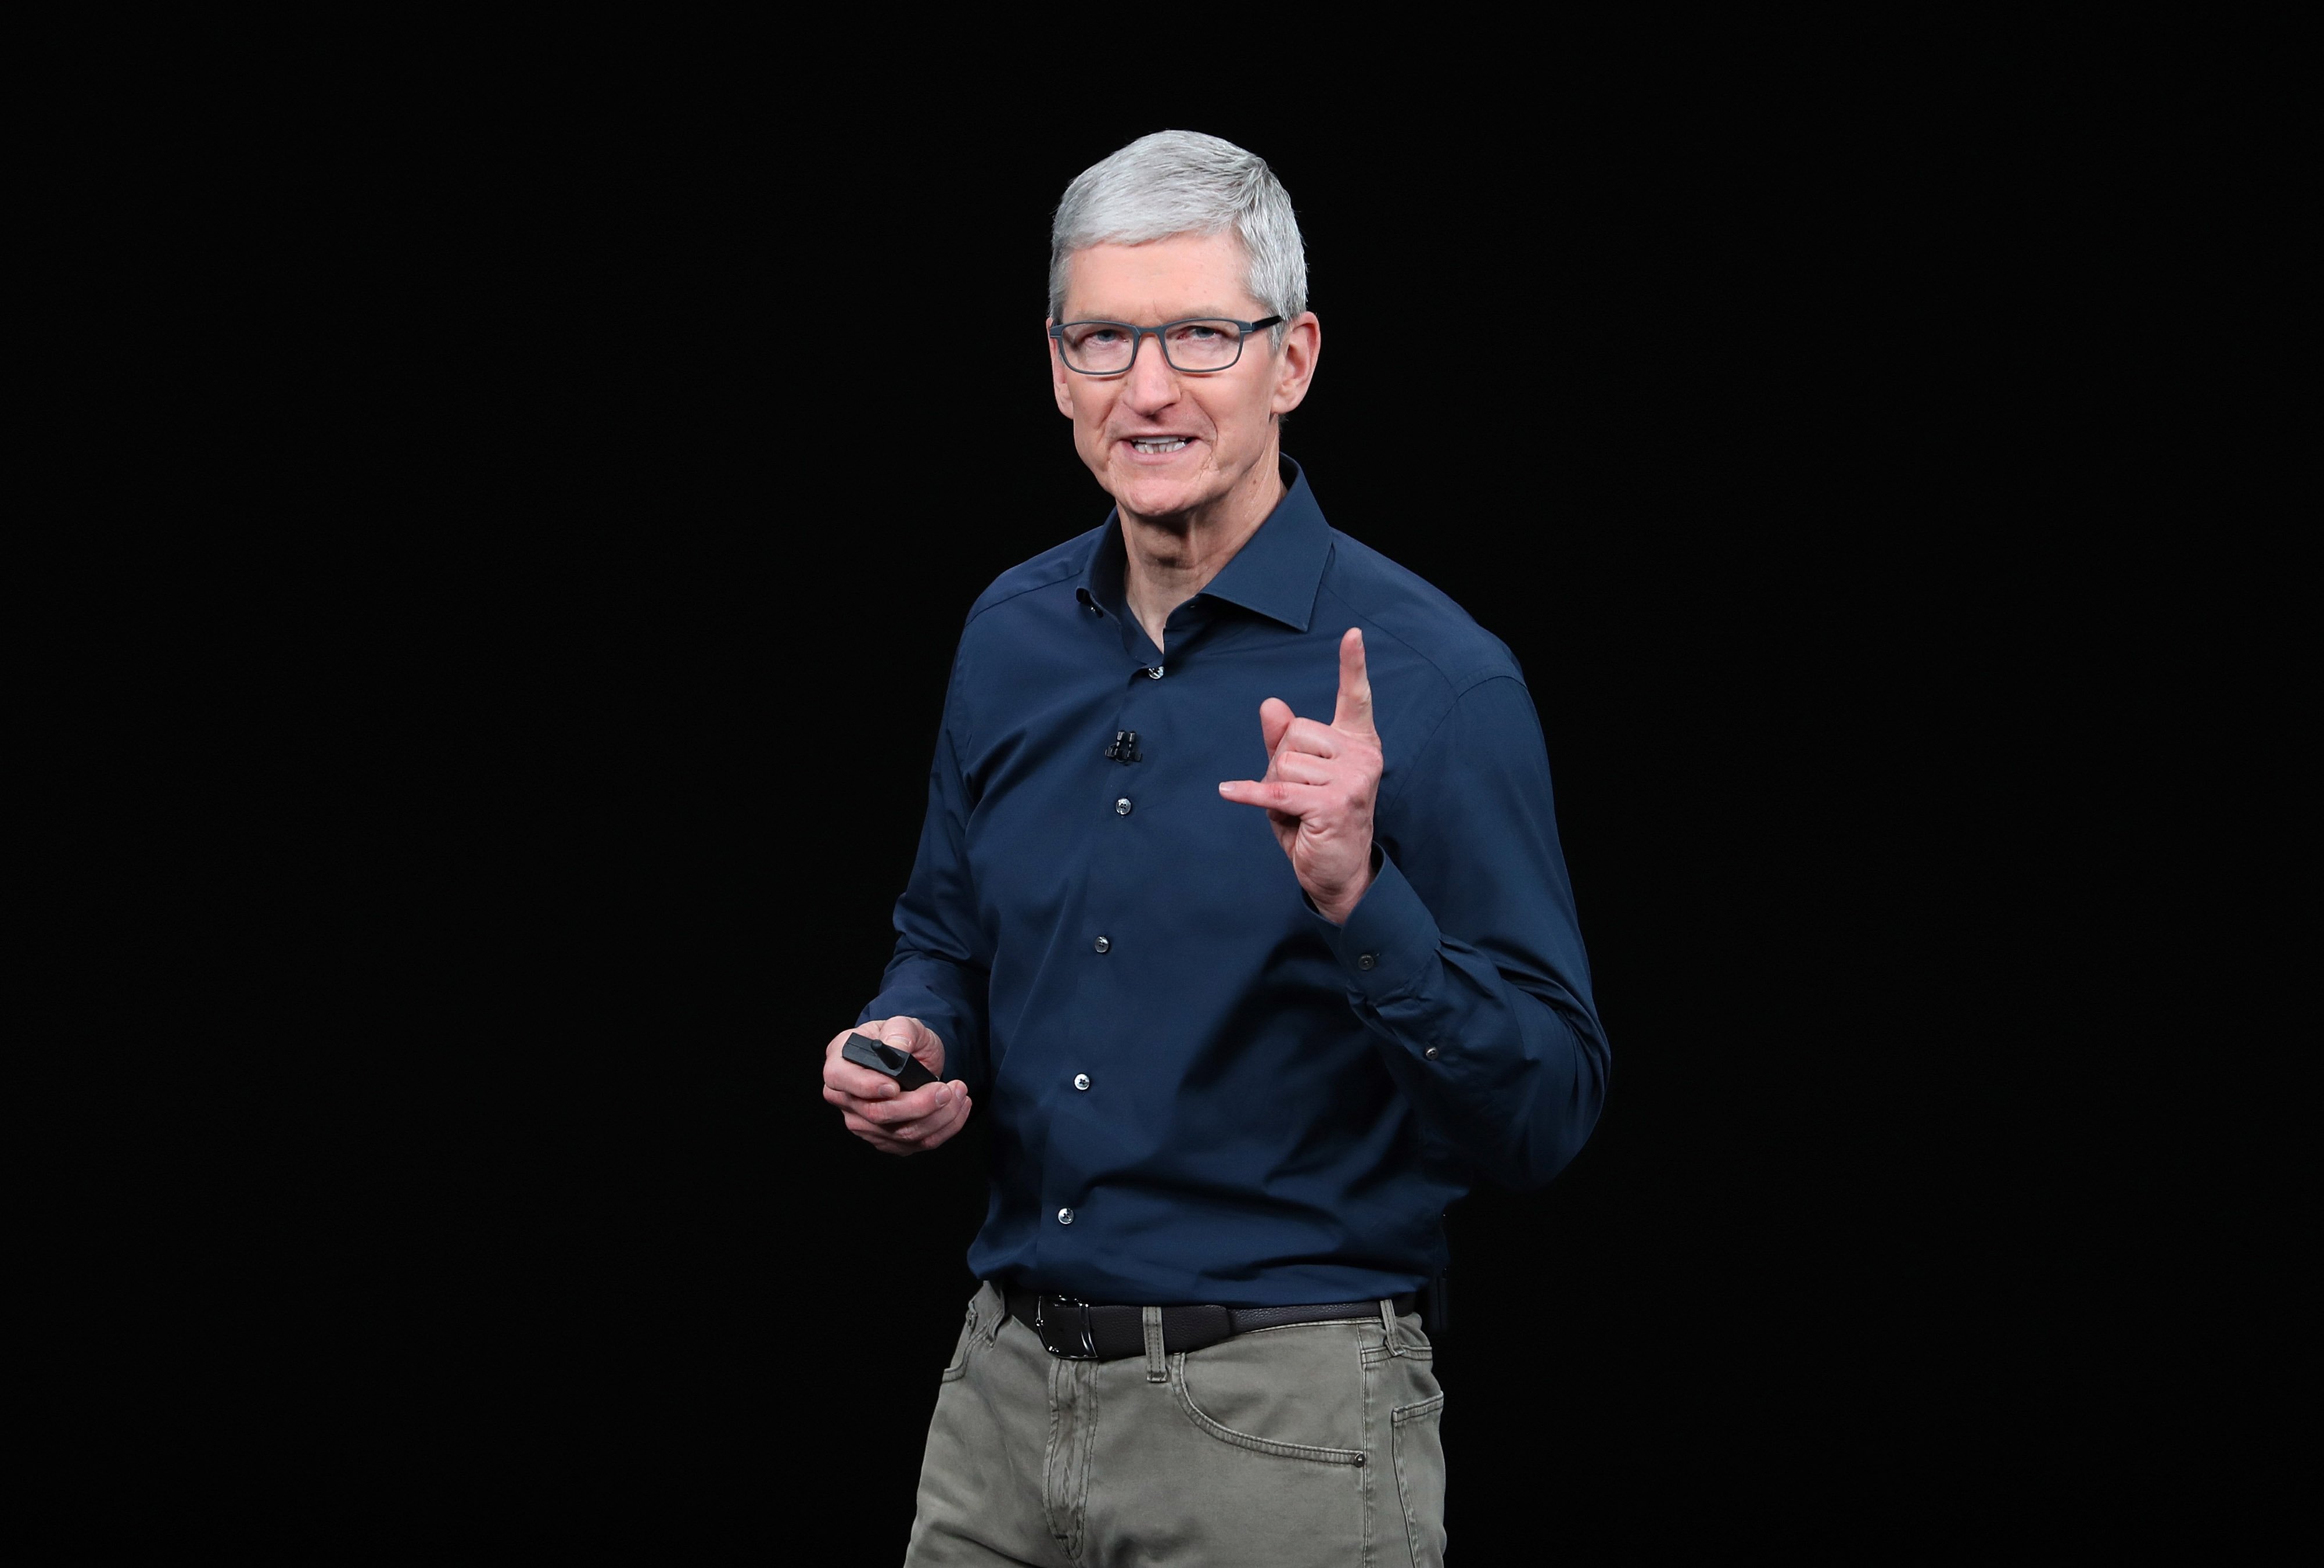 CUPERTINO, CALIFORNIA - SEPTEMBER 12: Tim Cook, chief executive officer of Apple, speaks during an Apple event at the Steve Jobs Theater at Apple Park on September 12, 2018 in Cupertino, California. Apple is expected to announce new iPhones with larger screens as well as other product upgrades. (Photo by Justin Sullivan/Getty Images)